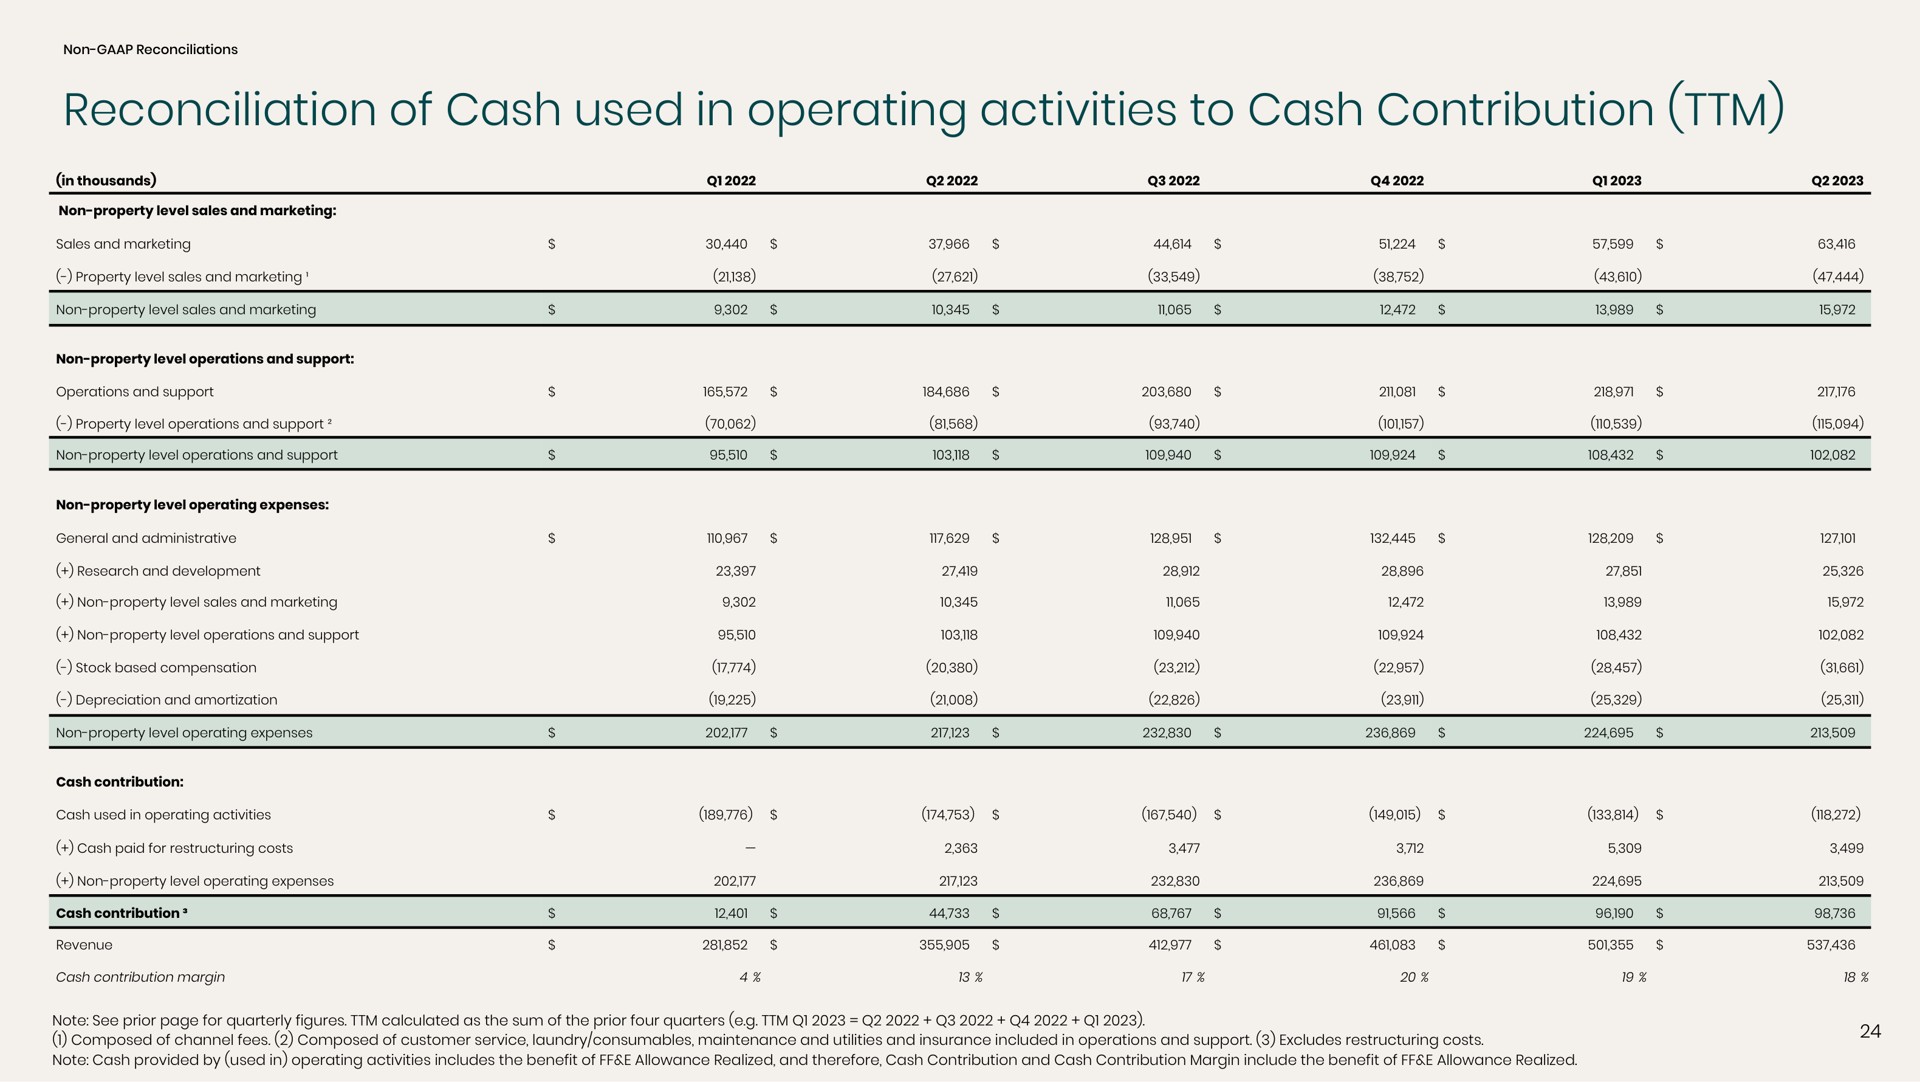 reconciliation of cash used in operating activities to cash contribution | Sonder